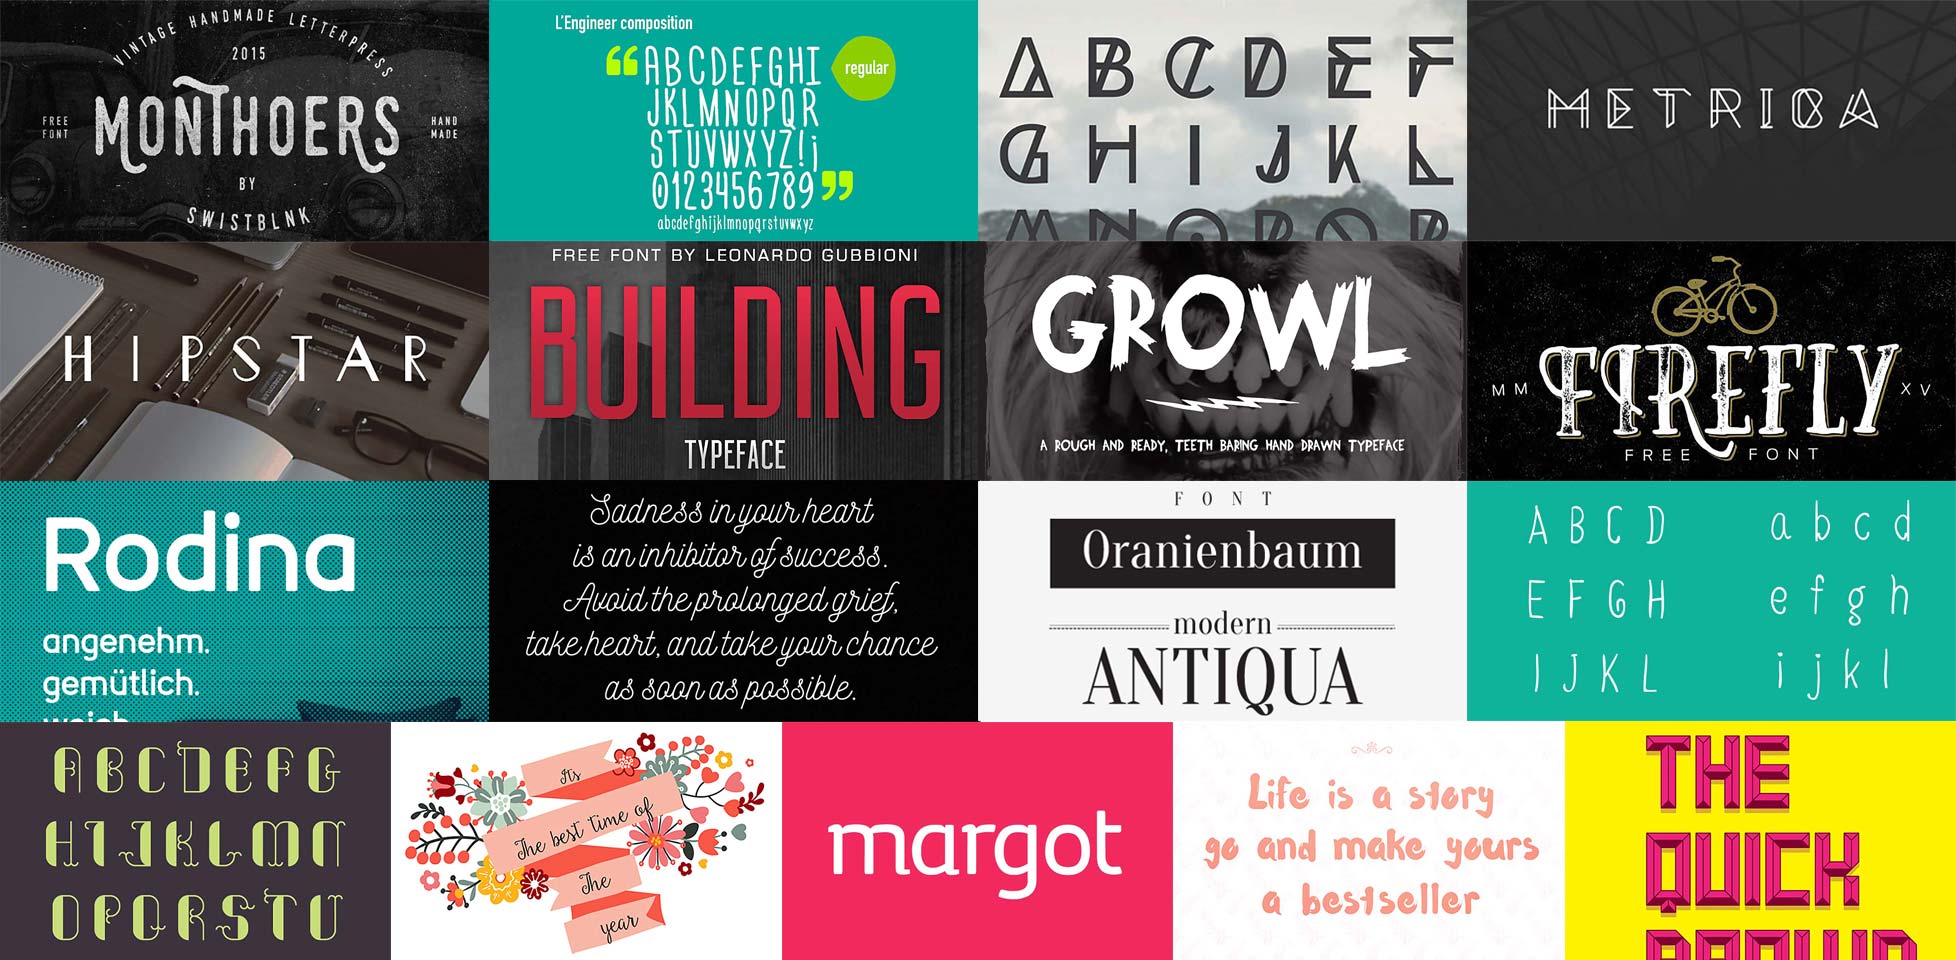 Free download: Font bundle featuring 17 incredible typefaces